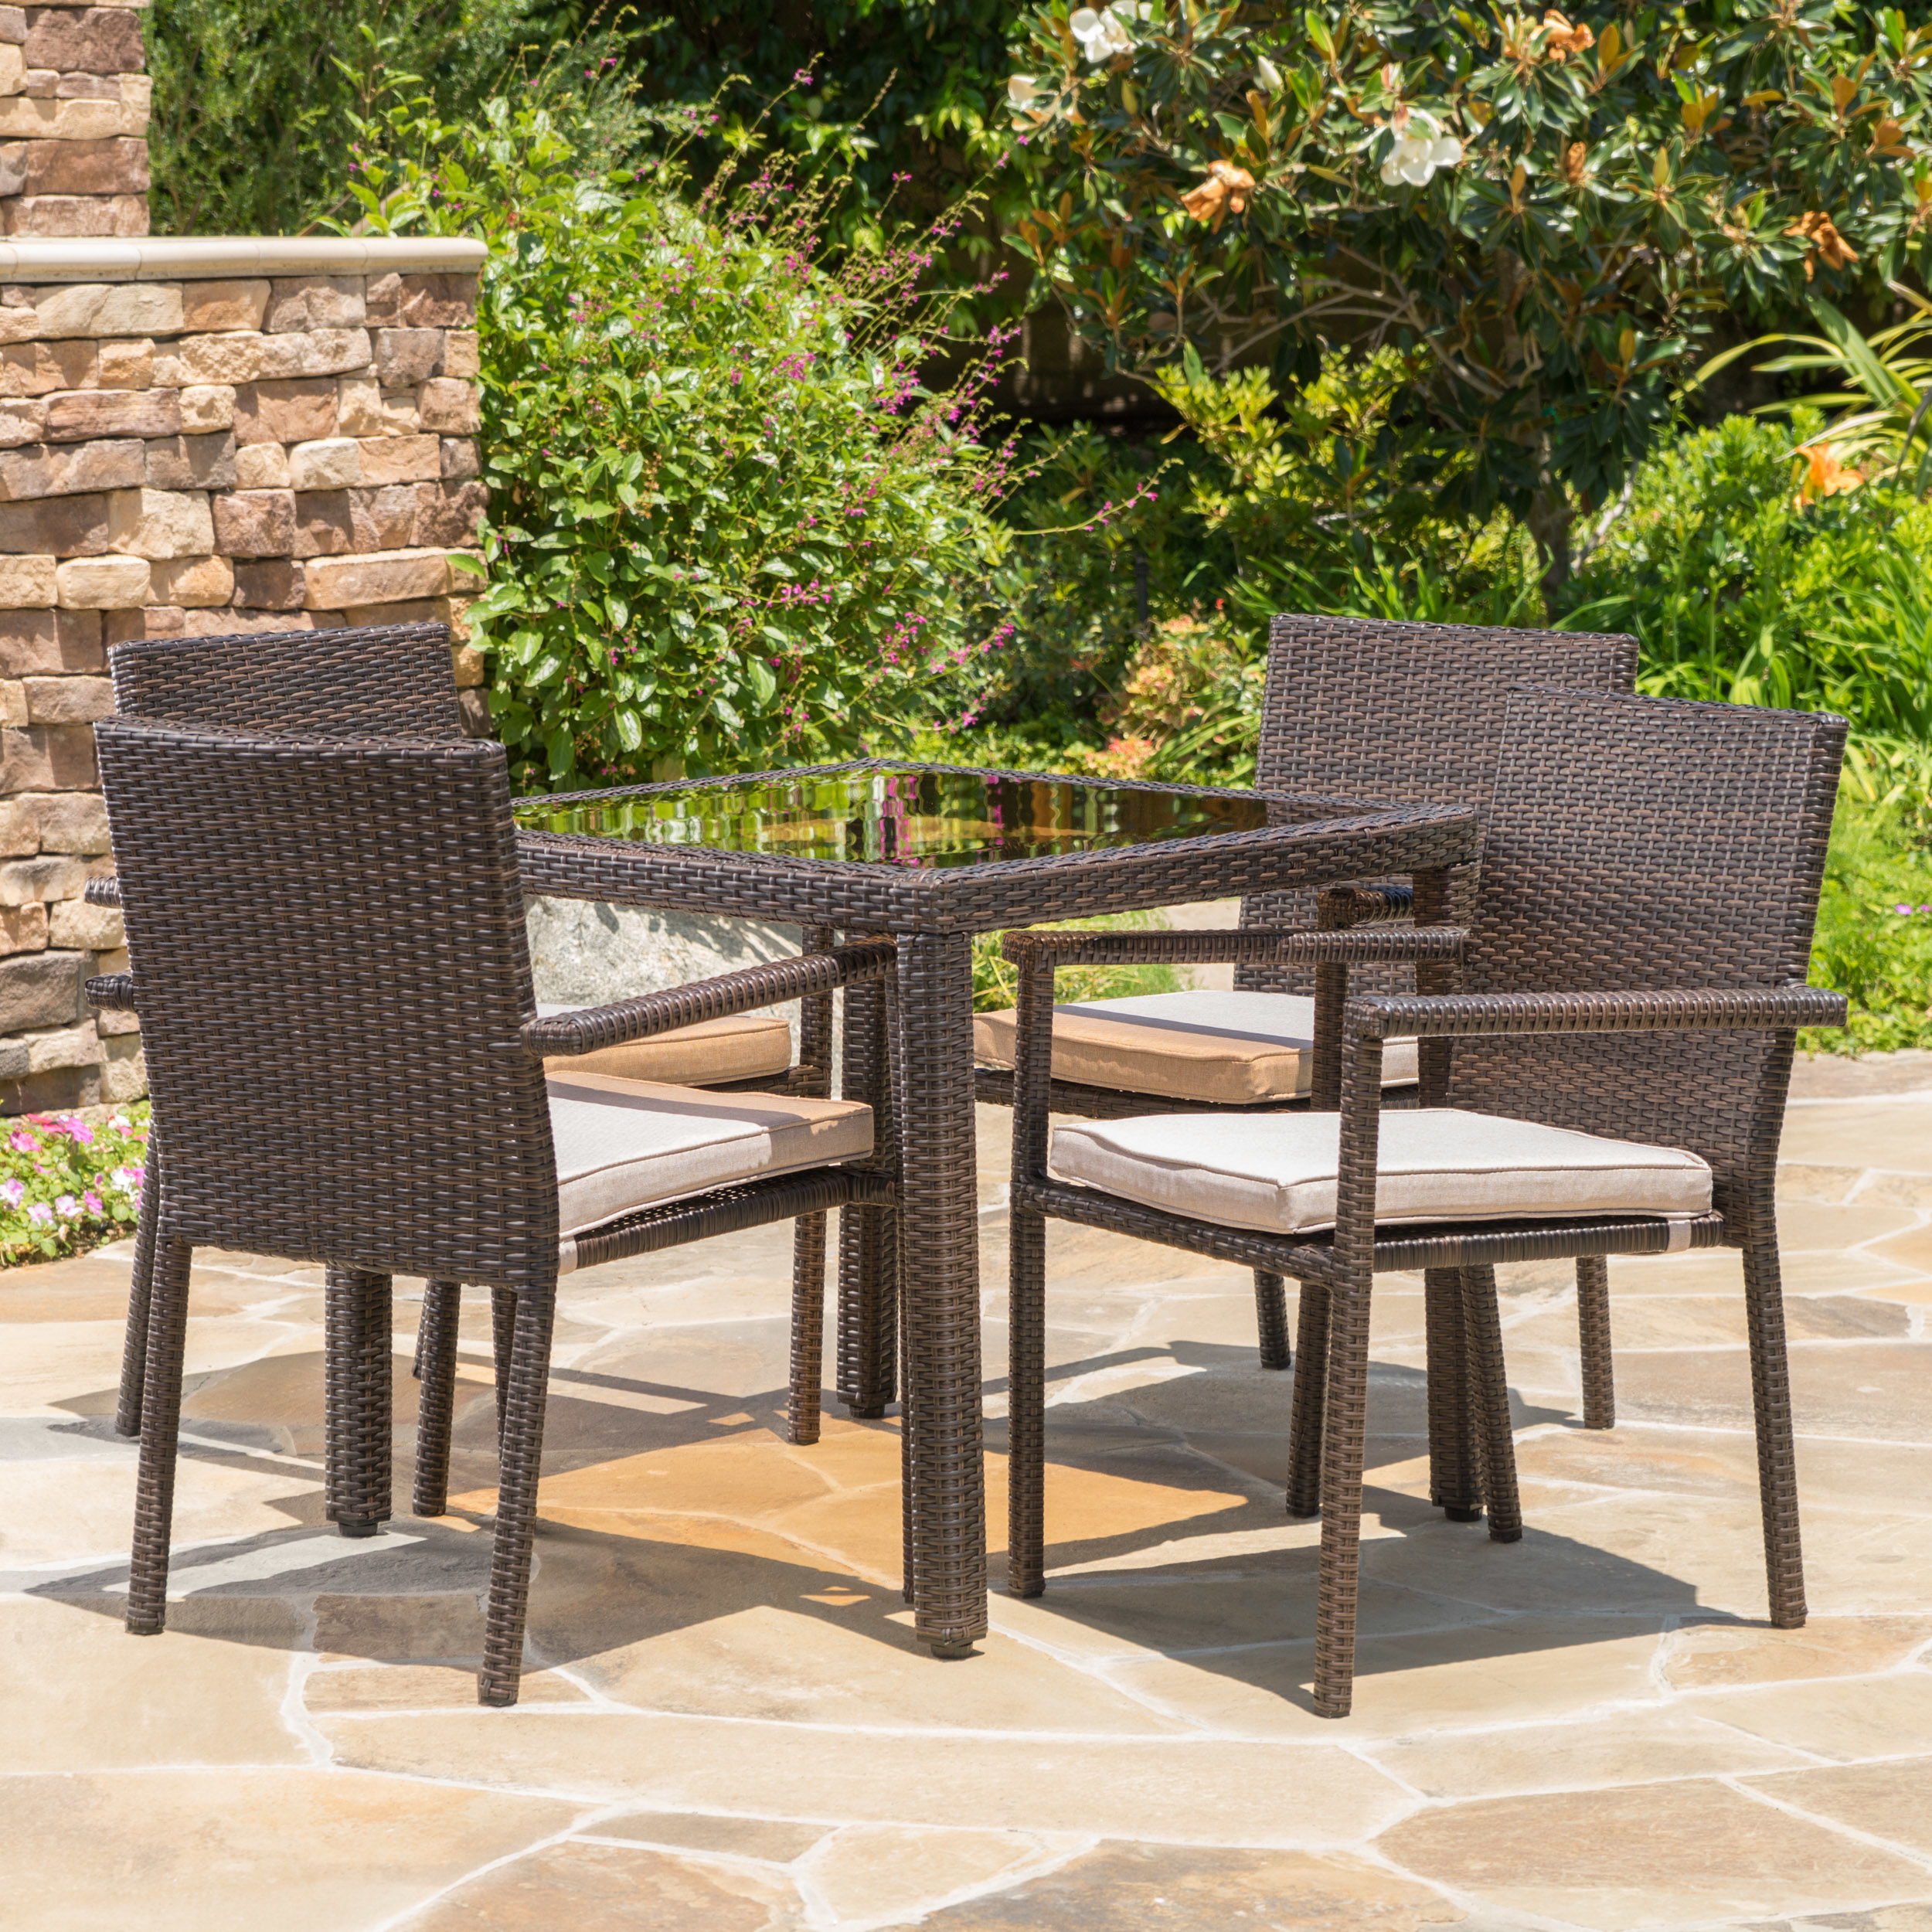 San Tropez Outdoor 5 Piece Dining Set With Water Resistant Cushions - Gray/Silver